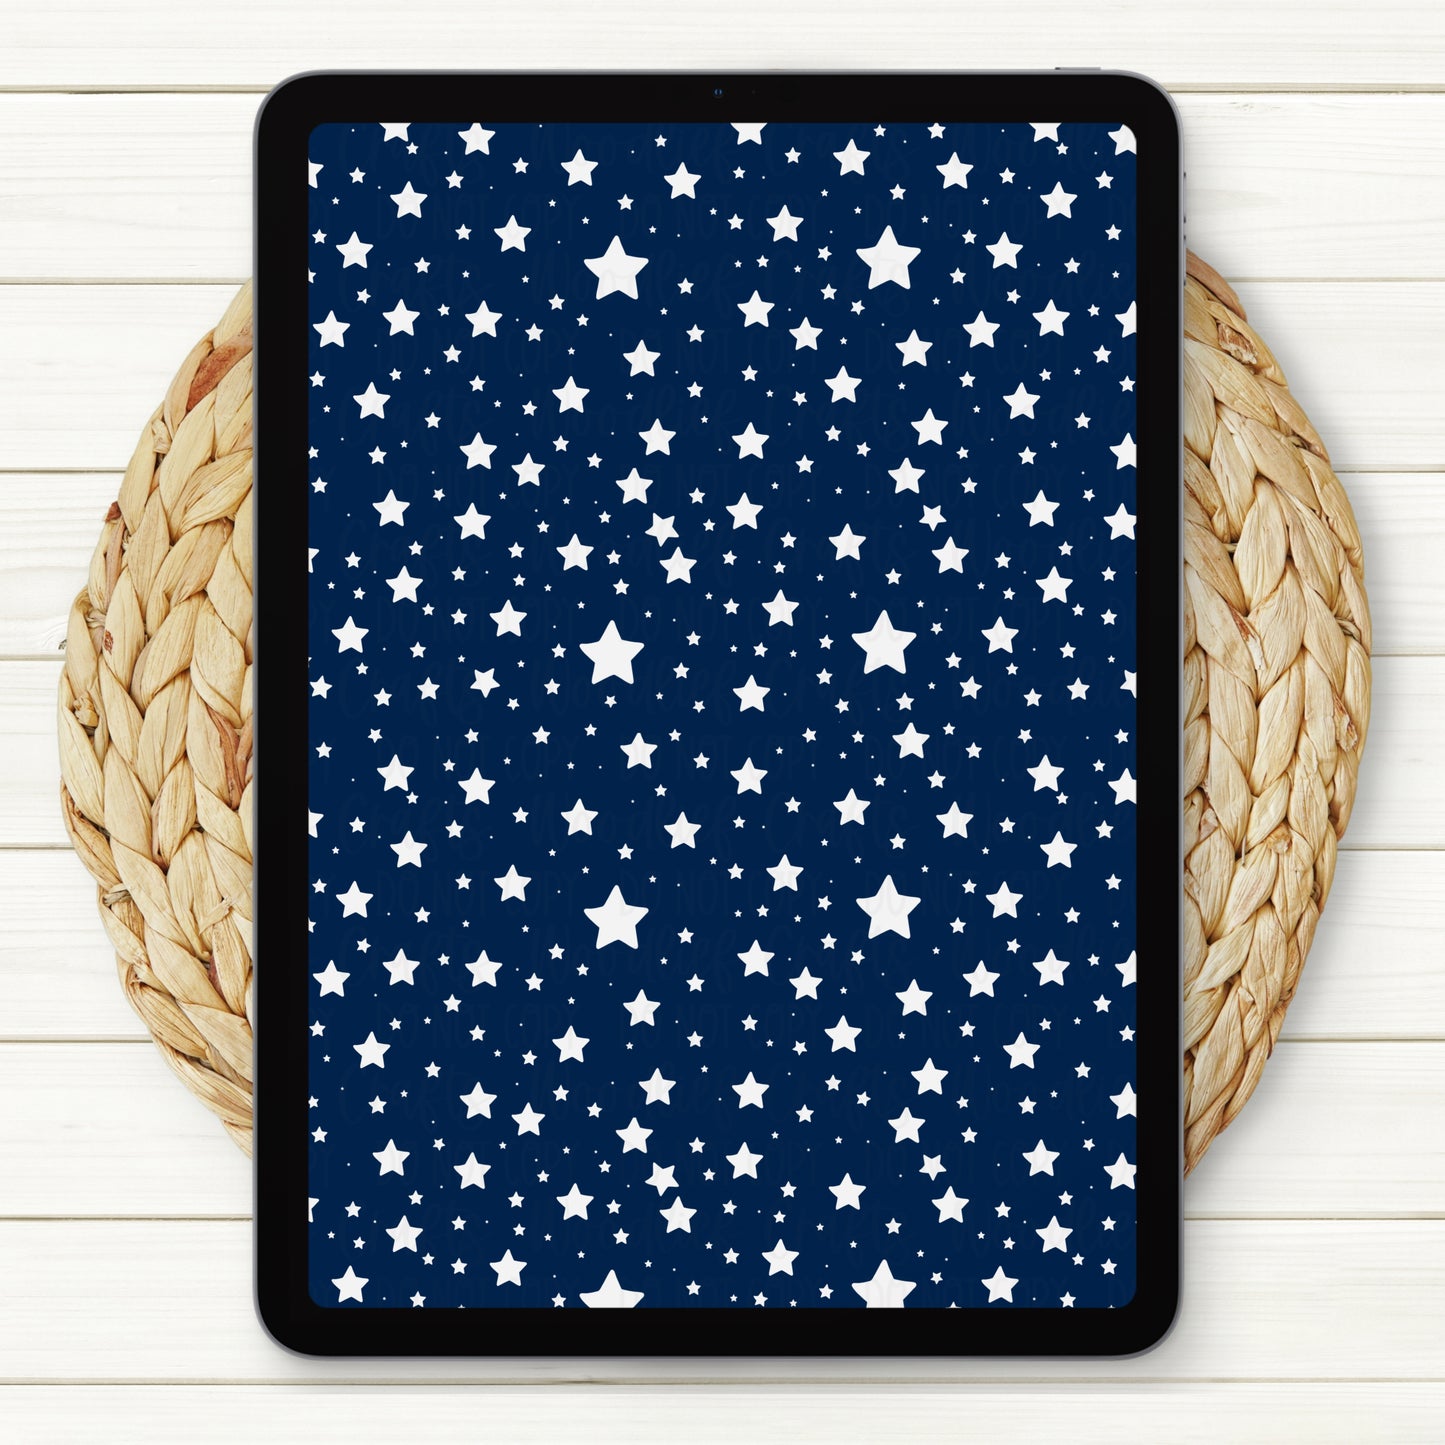 Stars Seamless Digital Paper | Two Scales Included